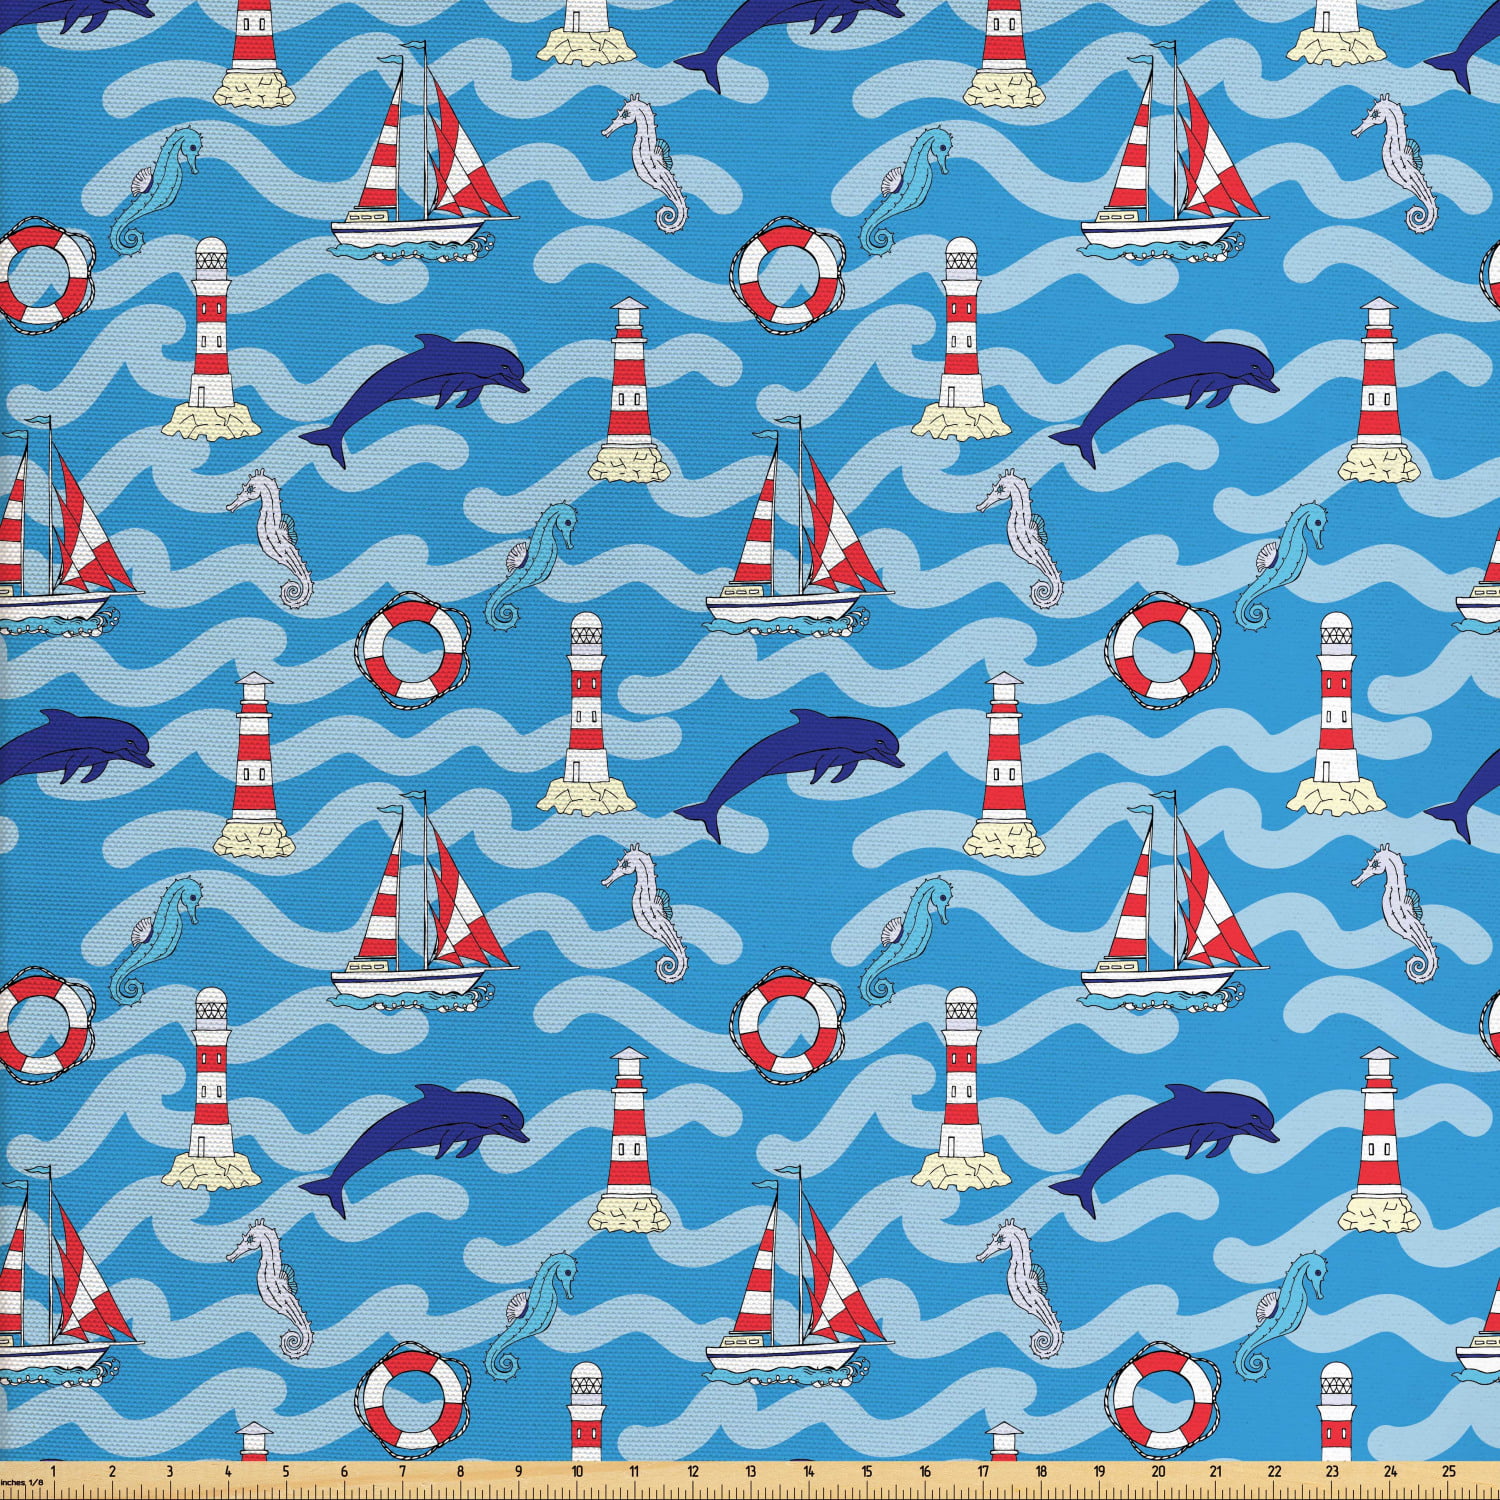 Lighthouse Fabric by The Yard, Wavy Lines Aquatic Elements Dolphins ...